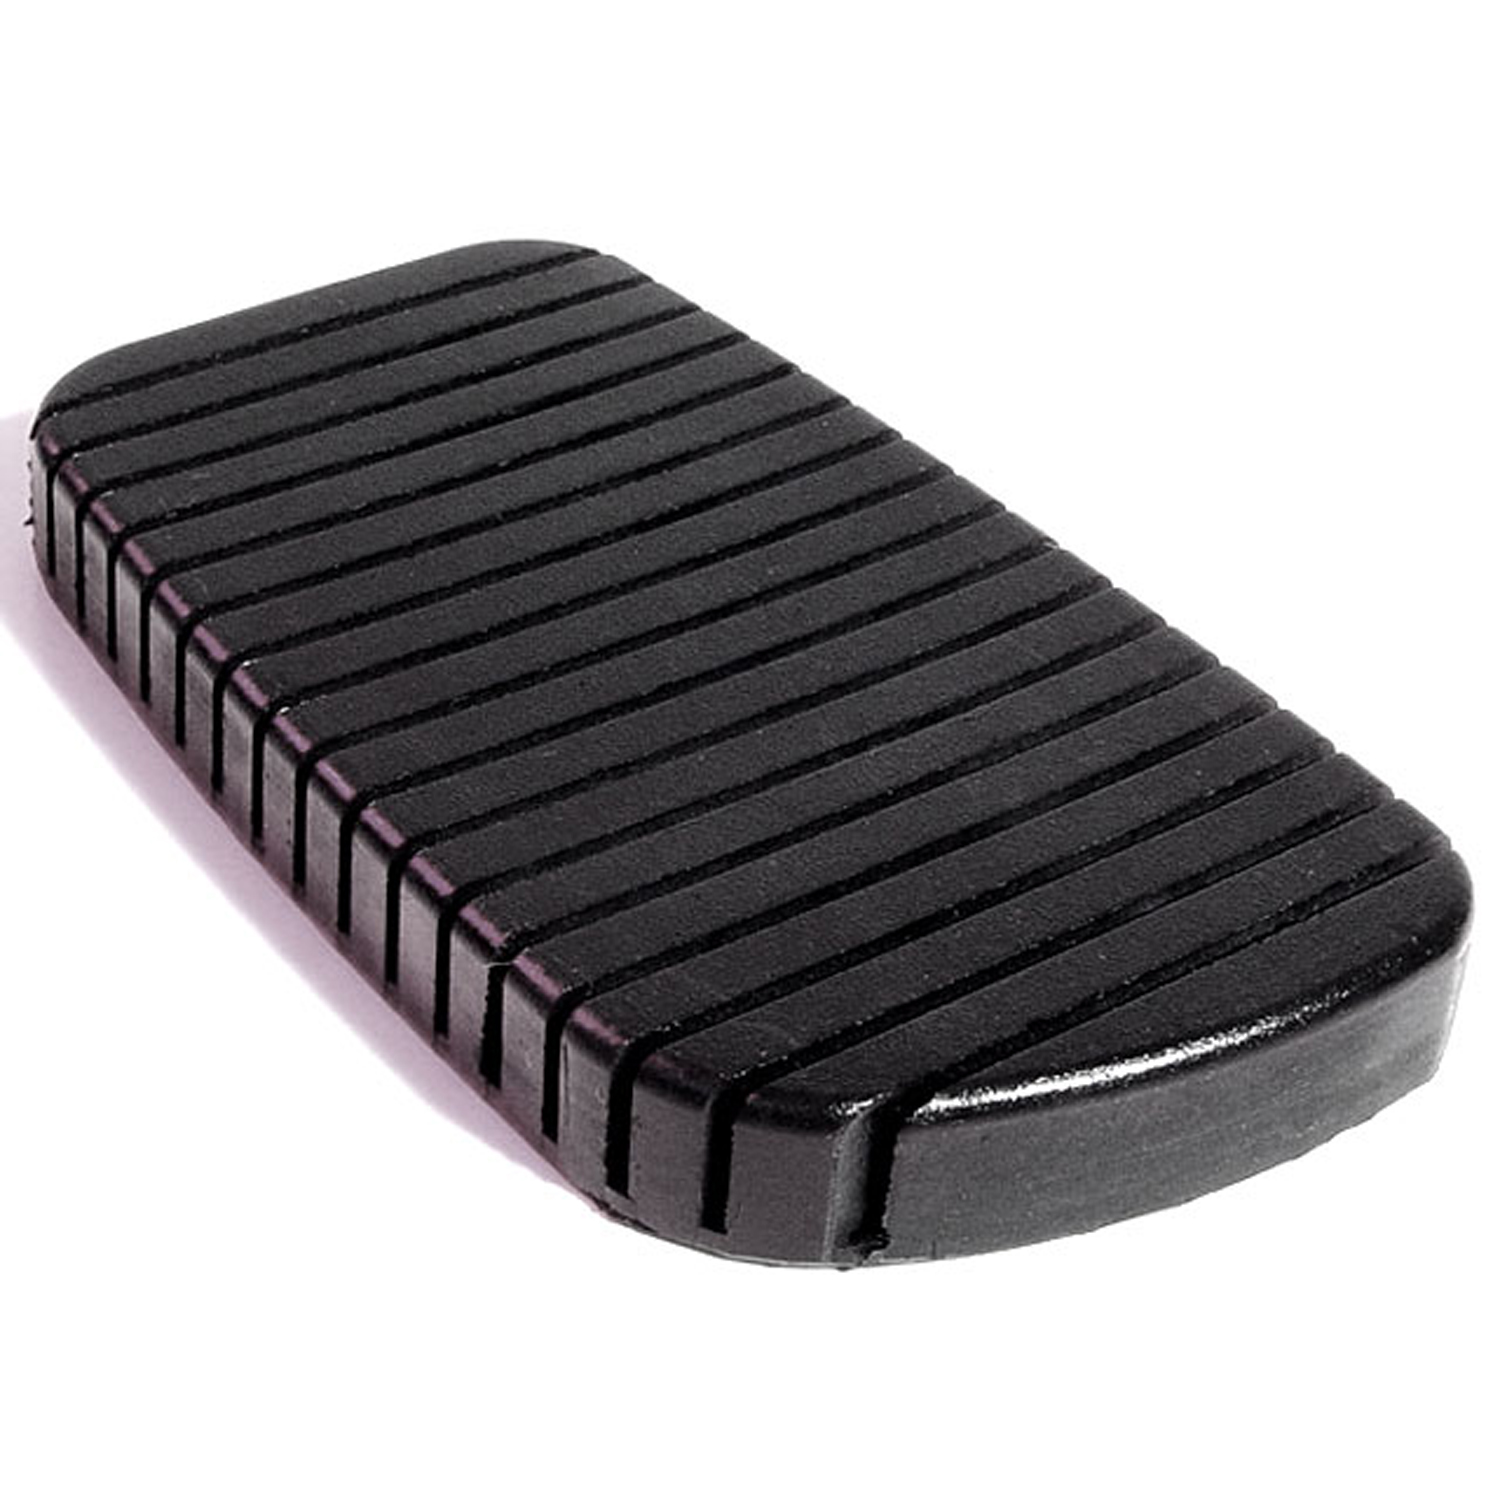 1954 Ford Mainline Brake Pedal Pad.  Correct reproduction of a difficult part-CB 90-C